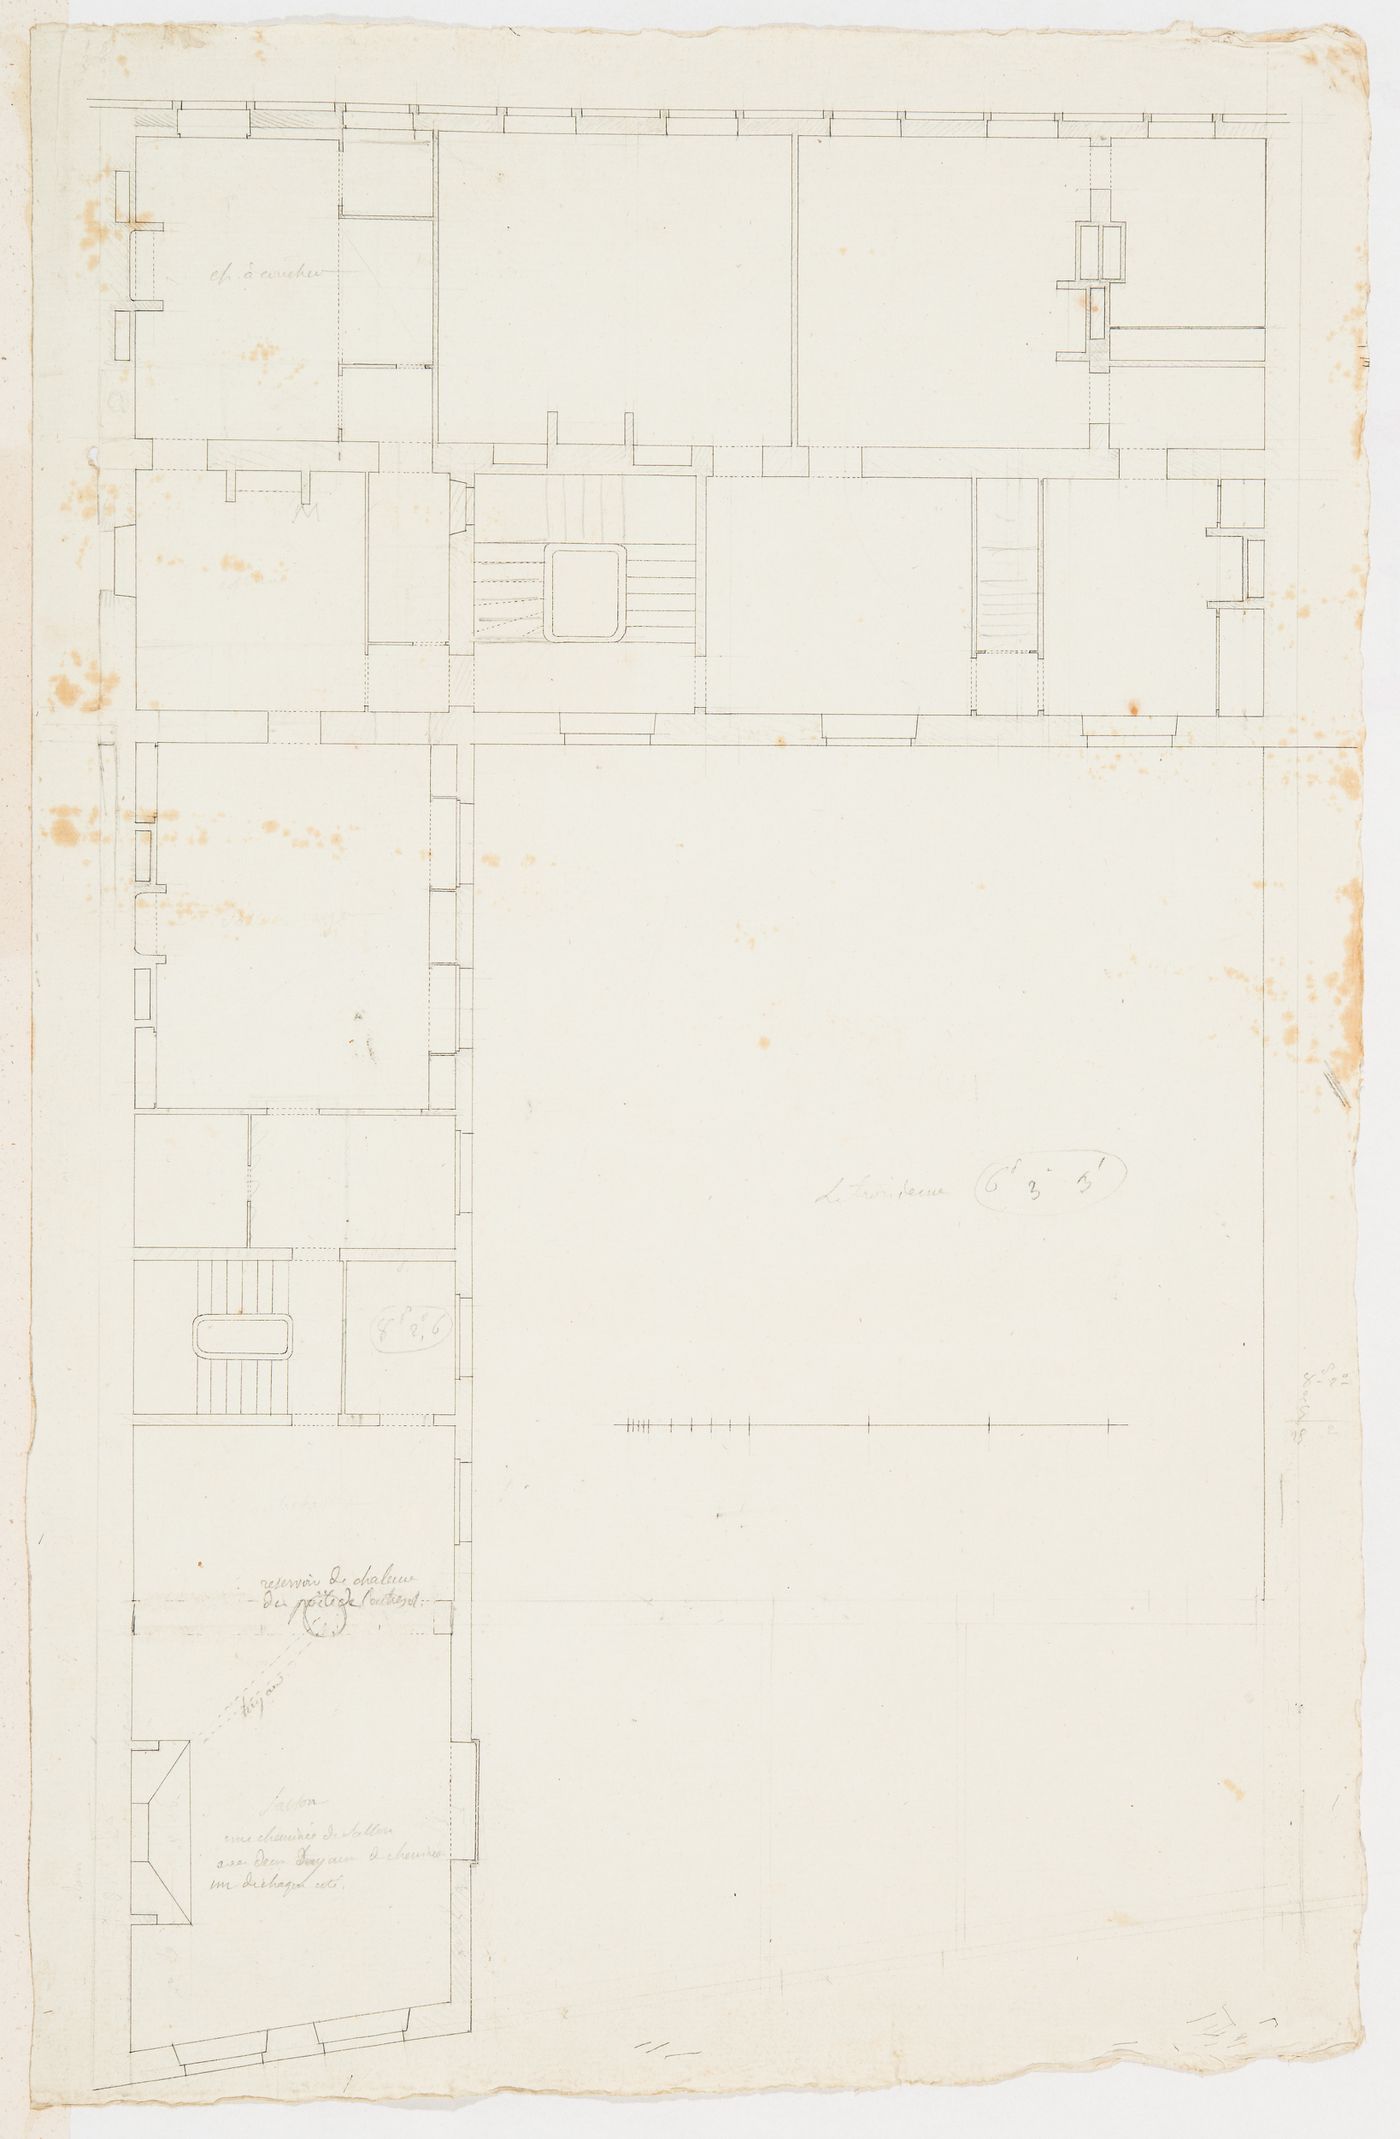 Project for renovations for a house for M. le Dhuy: Second floor plan